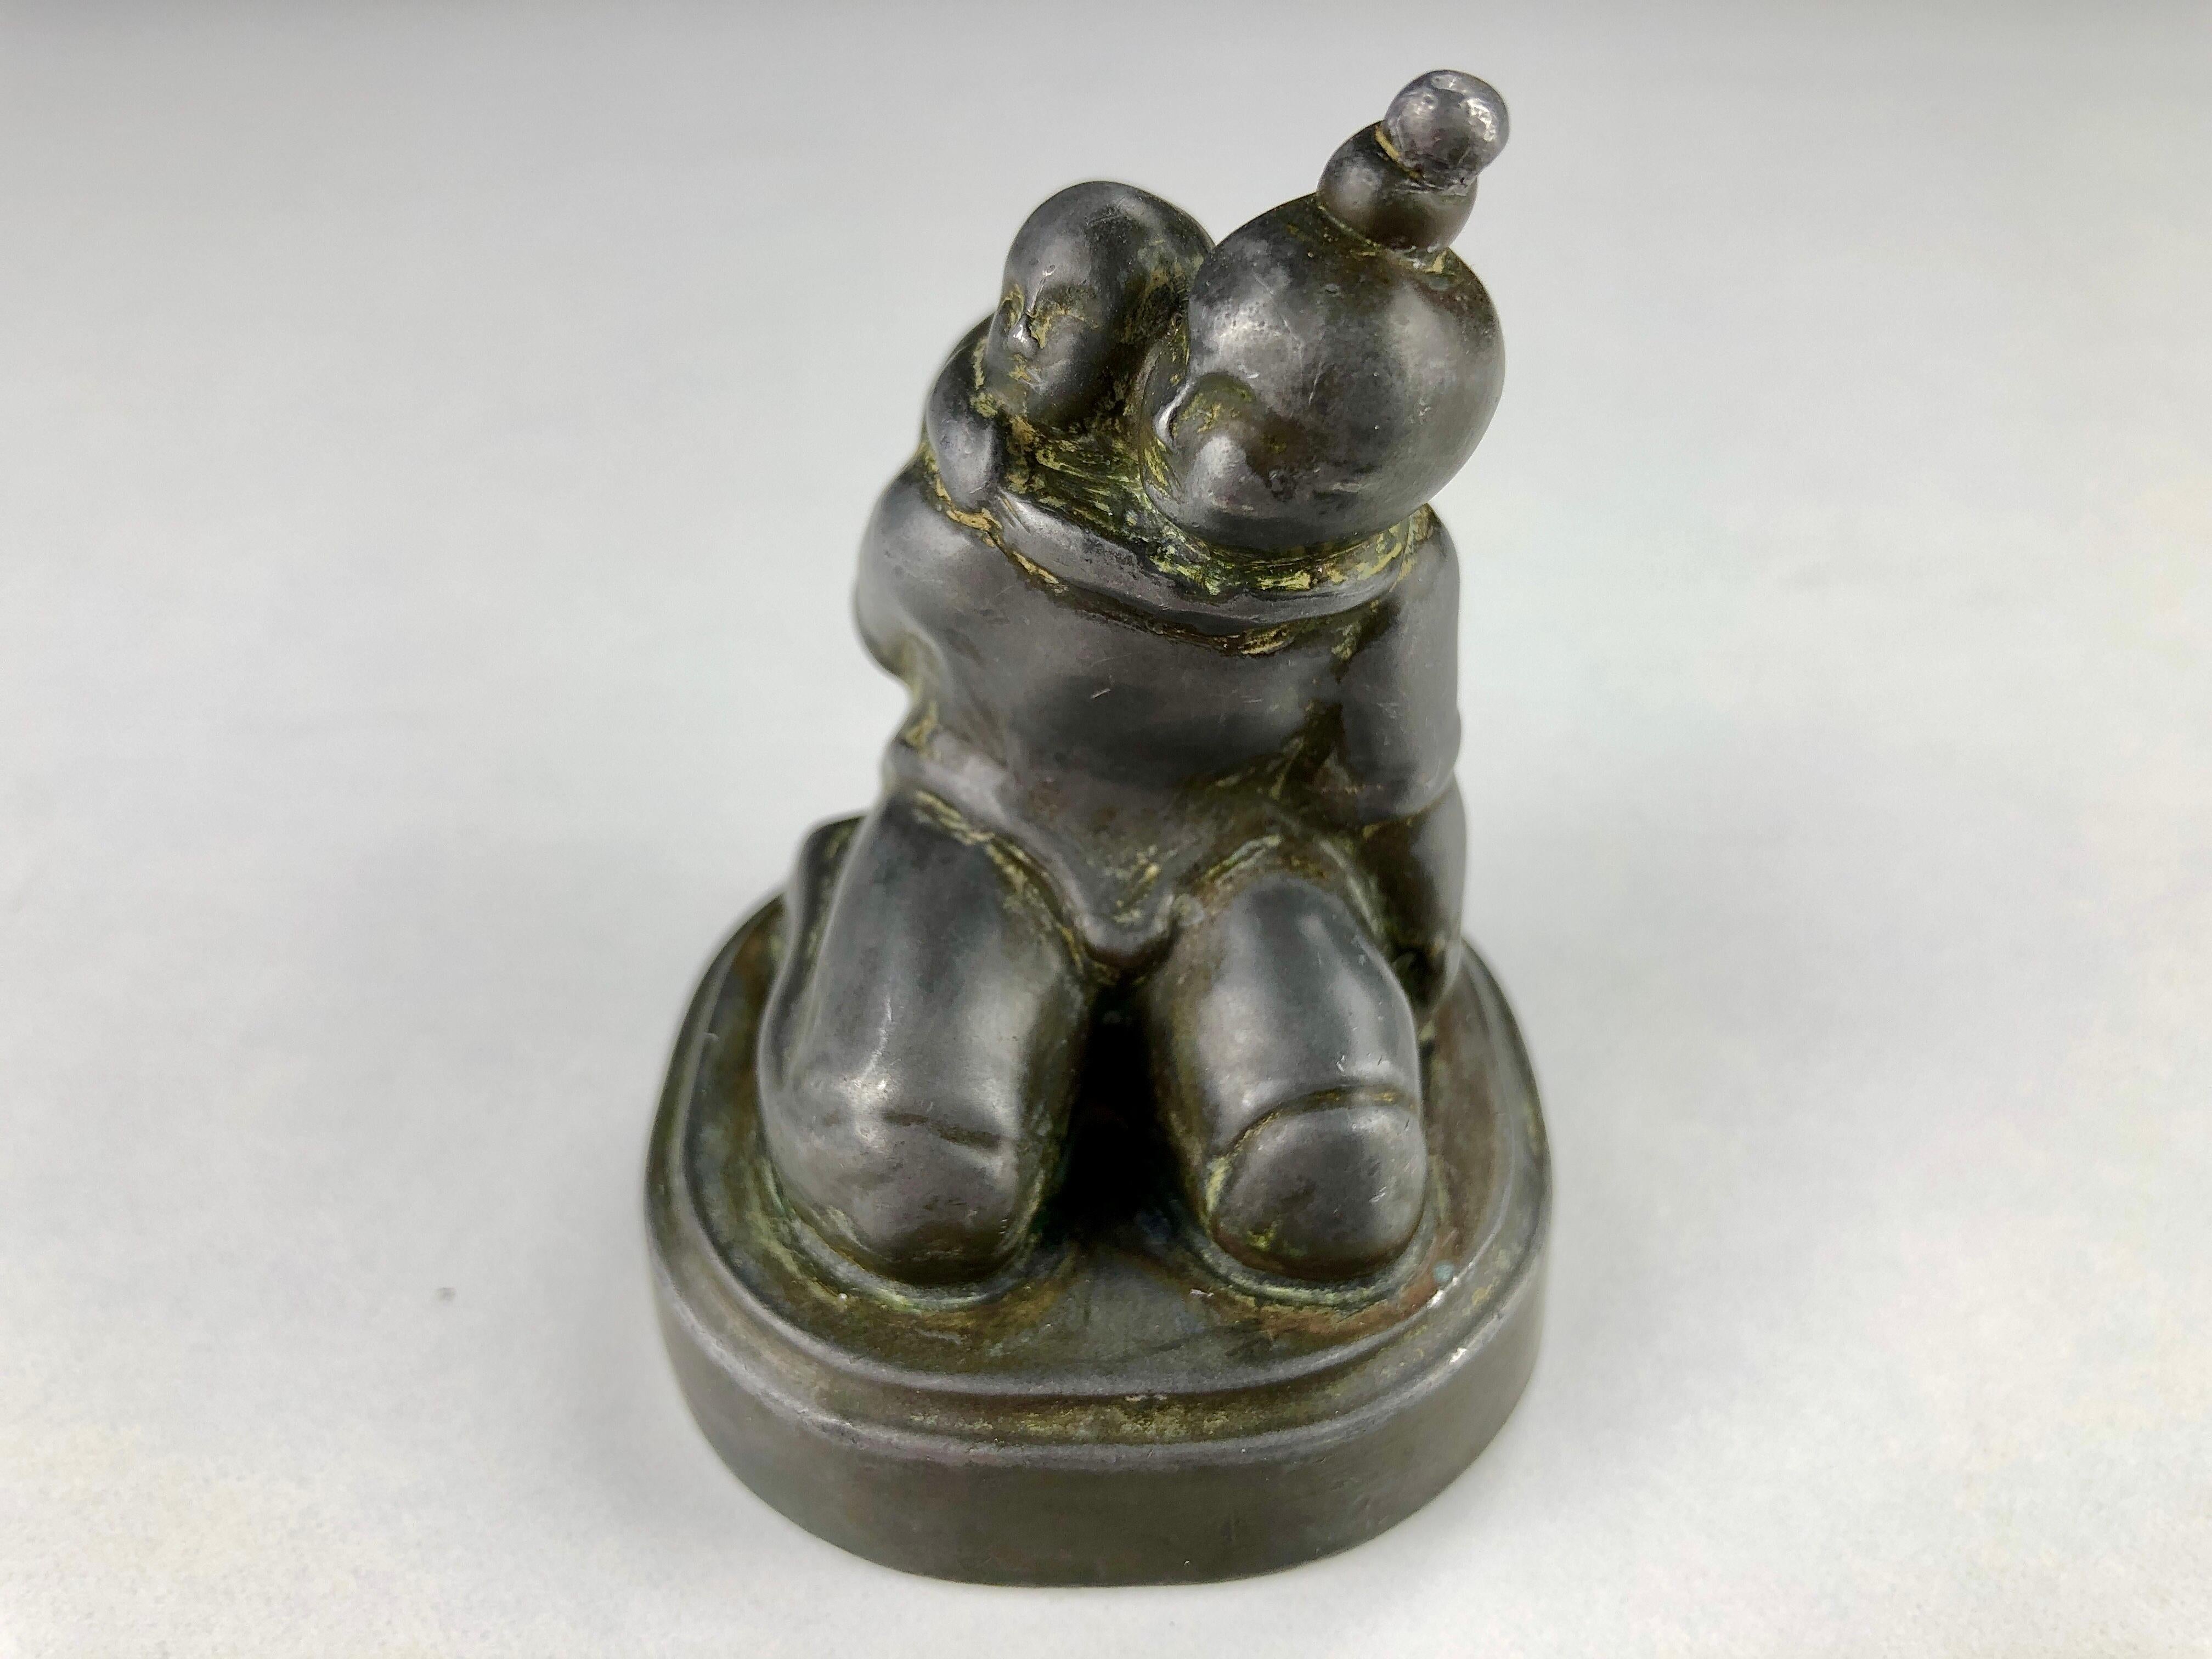 1940s Danish Just Andersen Disco Metal Figurine of Inuit Mother and Child

The figurine is made in Disco metal, an alloy of lead and antimony, which was Just Andersen's own invention and named after the Disko Bay in Greenland, where he grew up.

The